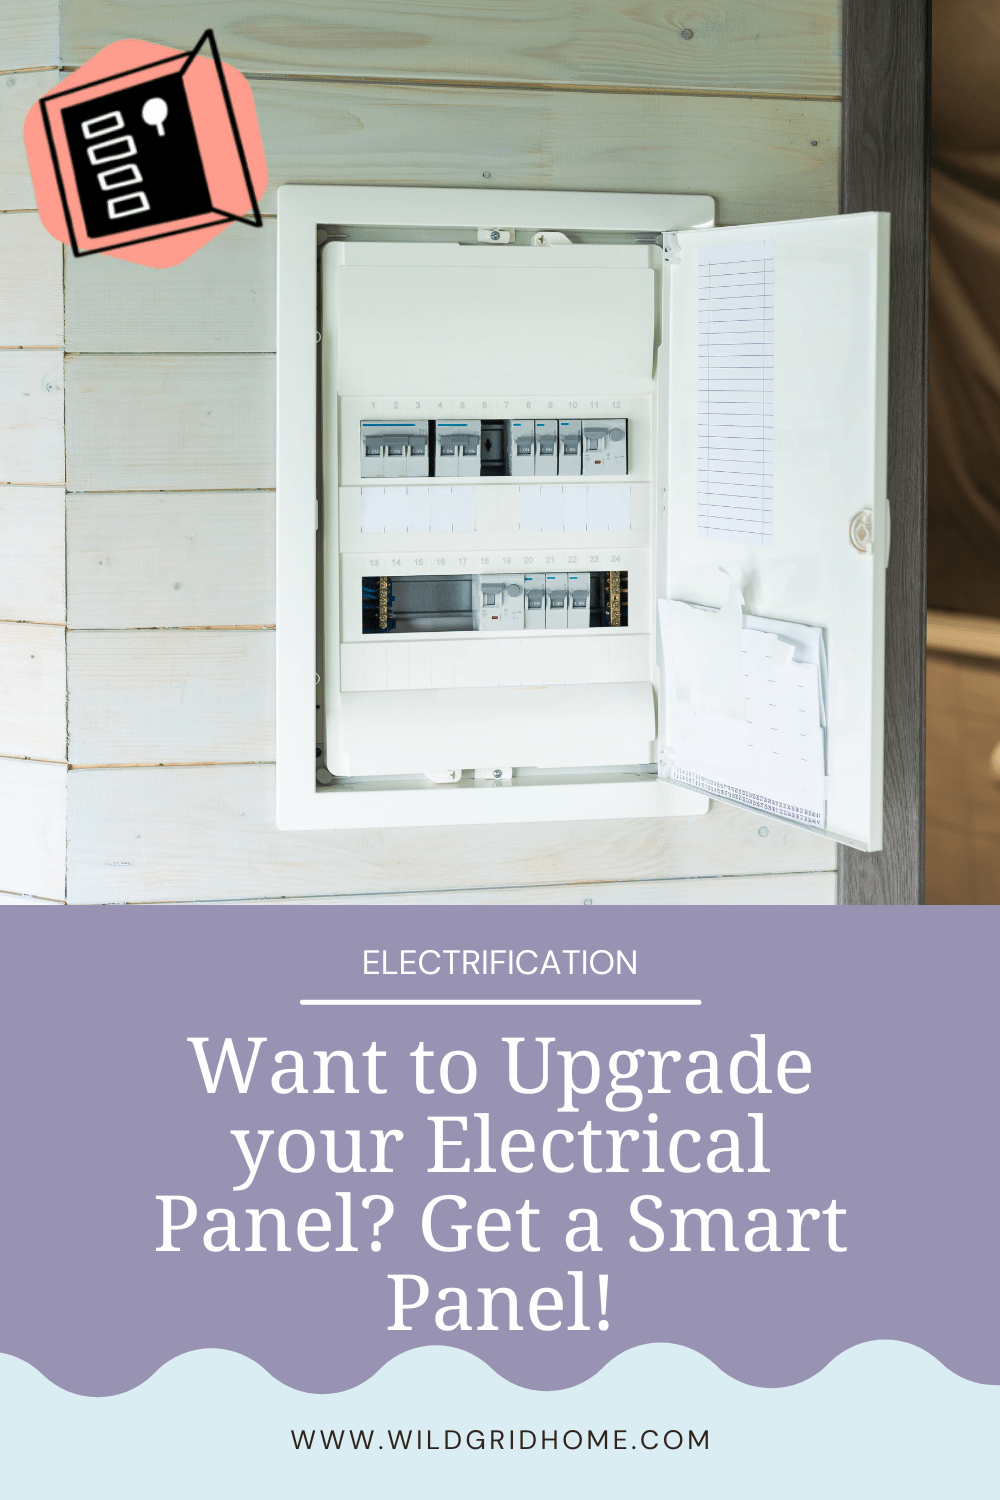 Want to Upgrade your Electrical Panel? Make the Smart Choice: Get a Smart Panel - Wildgrid Home - Wildgrid Home